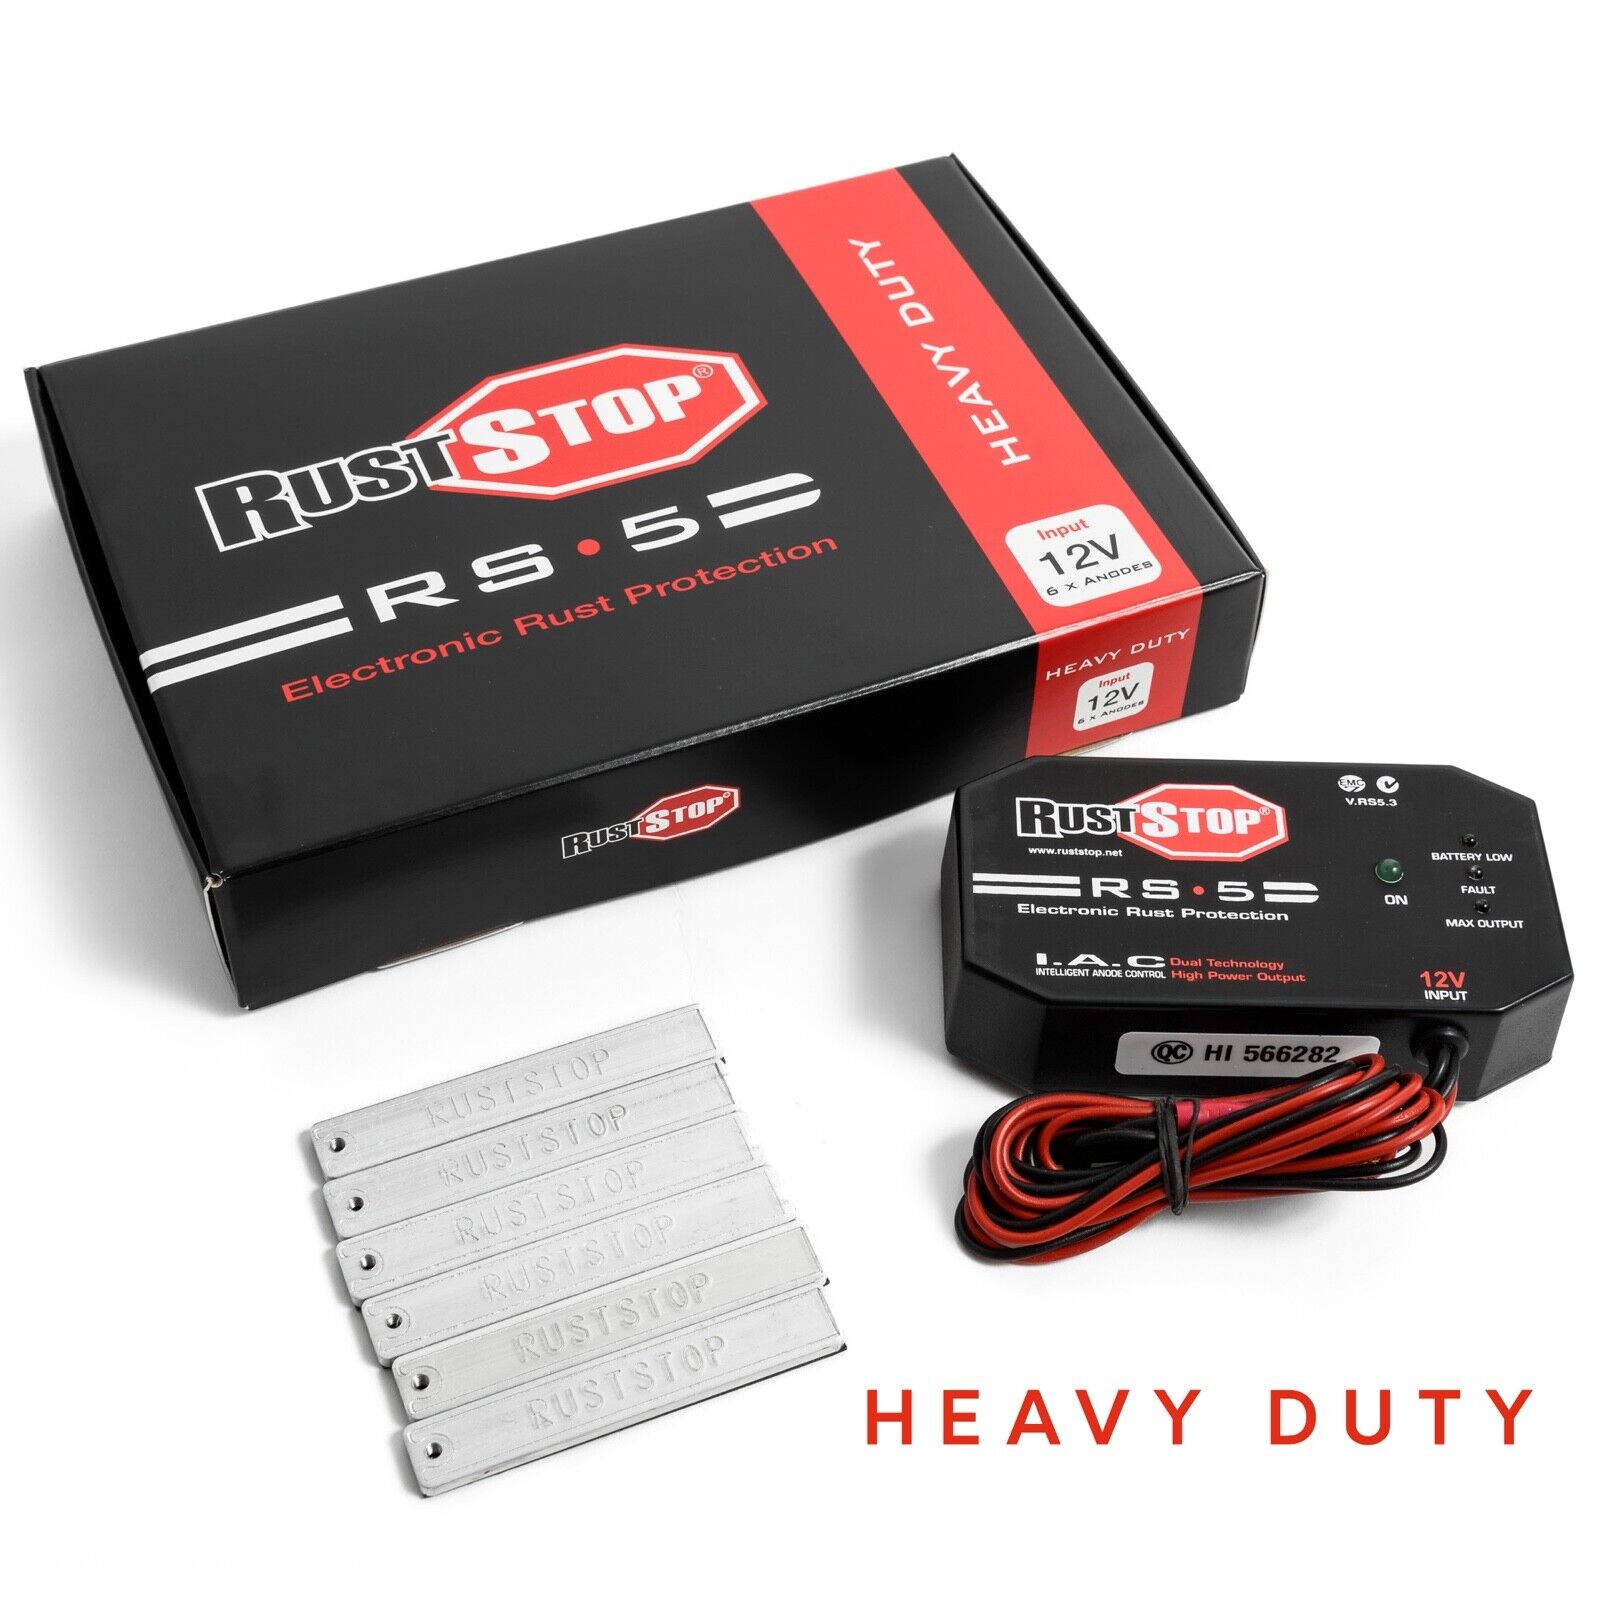 RustStop RS-5 - HEAVY DUTY Electronic Rust Protection for 4WD and Large Vehicles